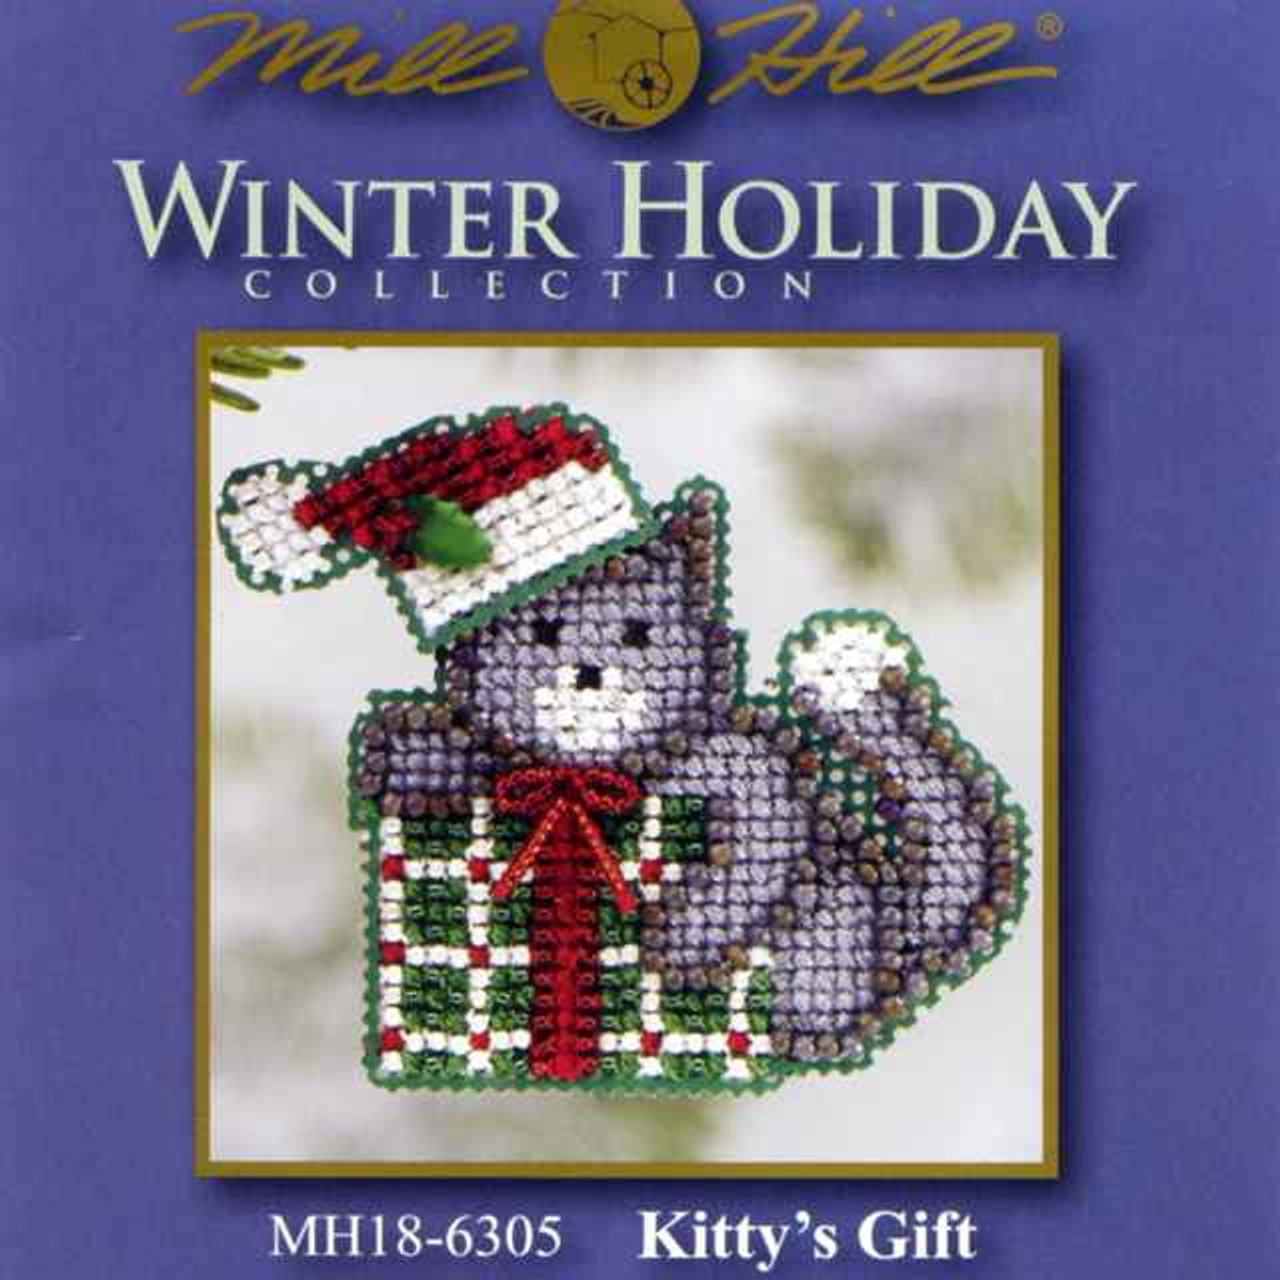 Kitty's Gift Bead Christmas Ornament Kit Mill Hill 2006 Winter Holiday